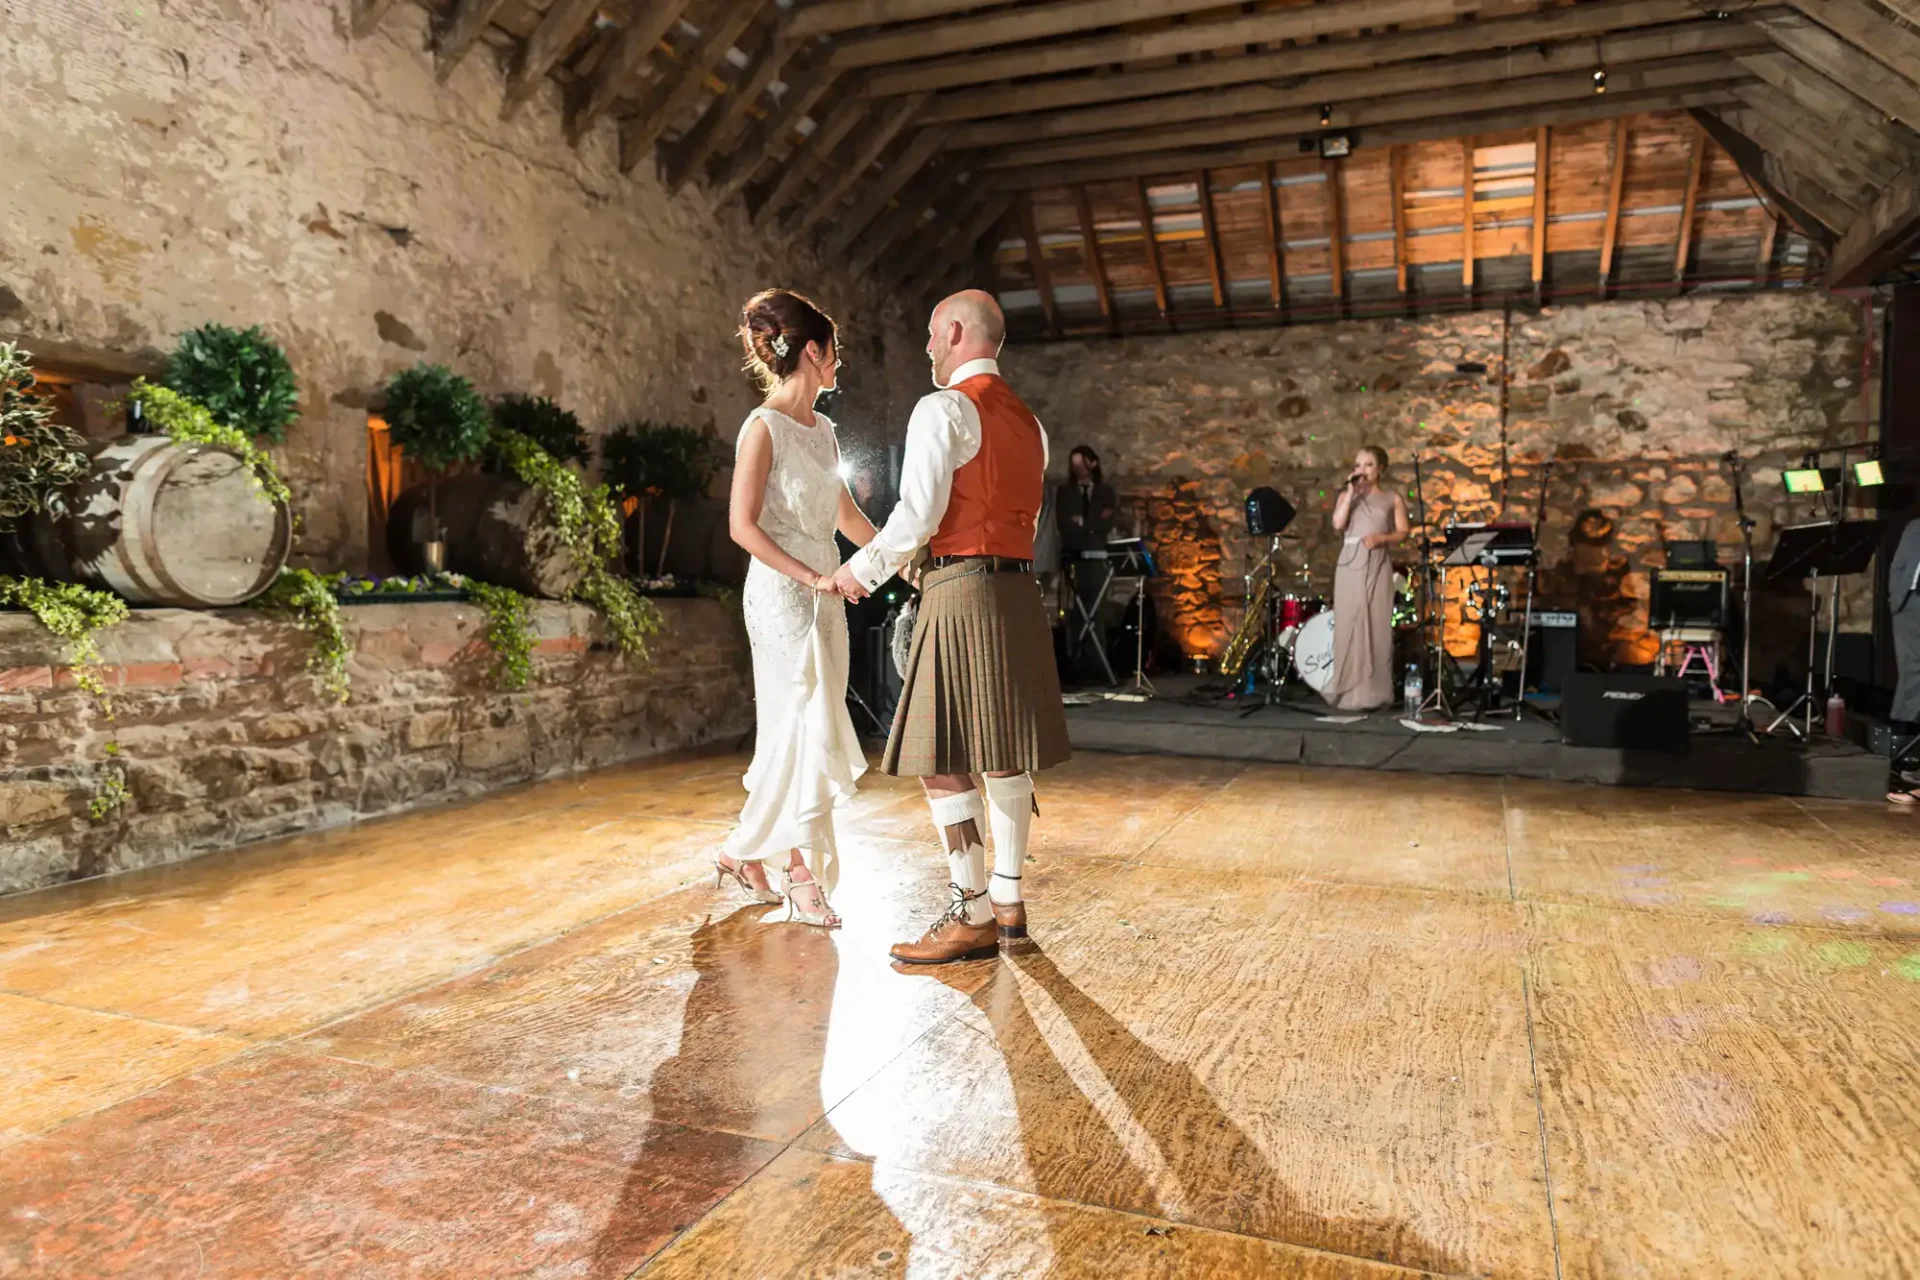 A bride and groom in traditional scottish attire share a dance in a rustic barn venue with a live band in the background.